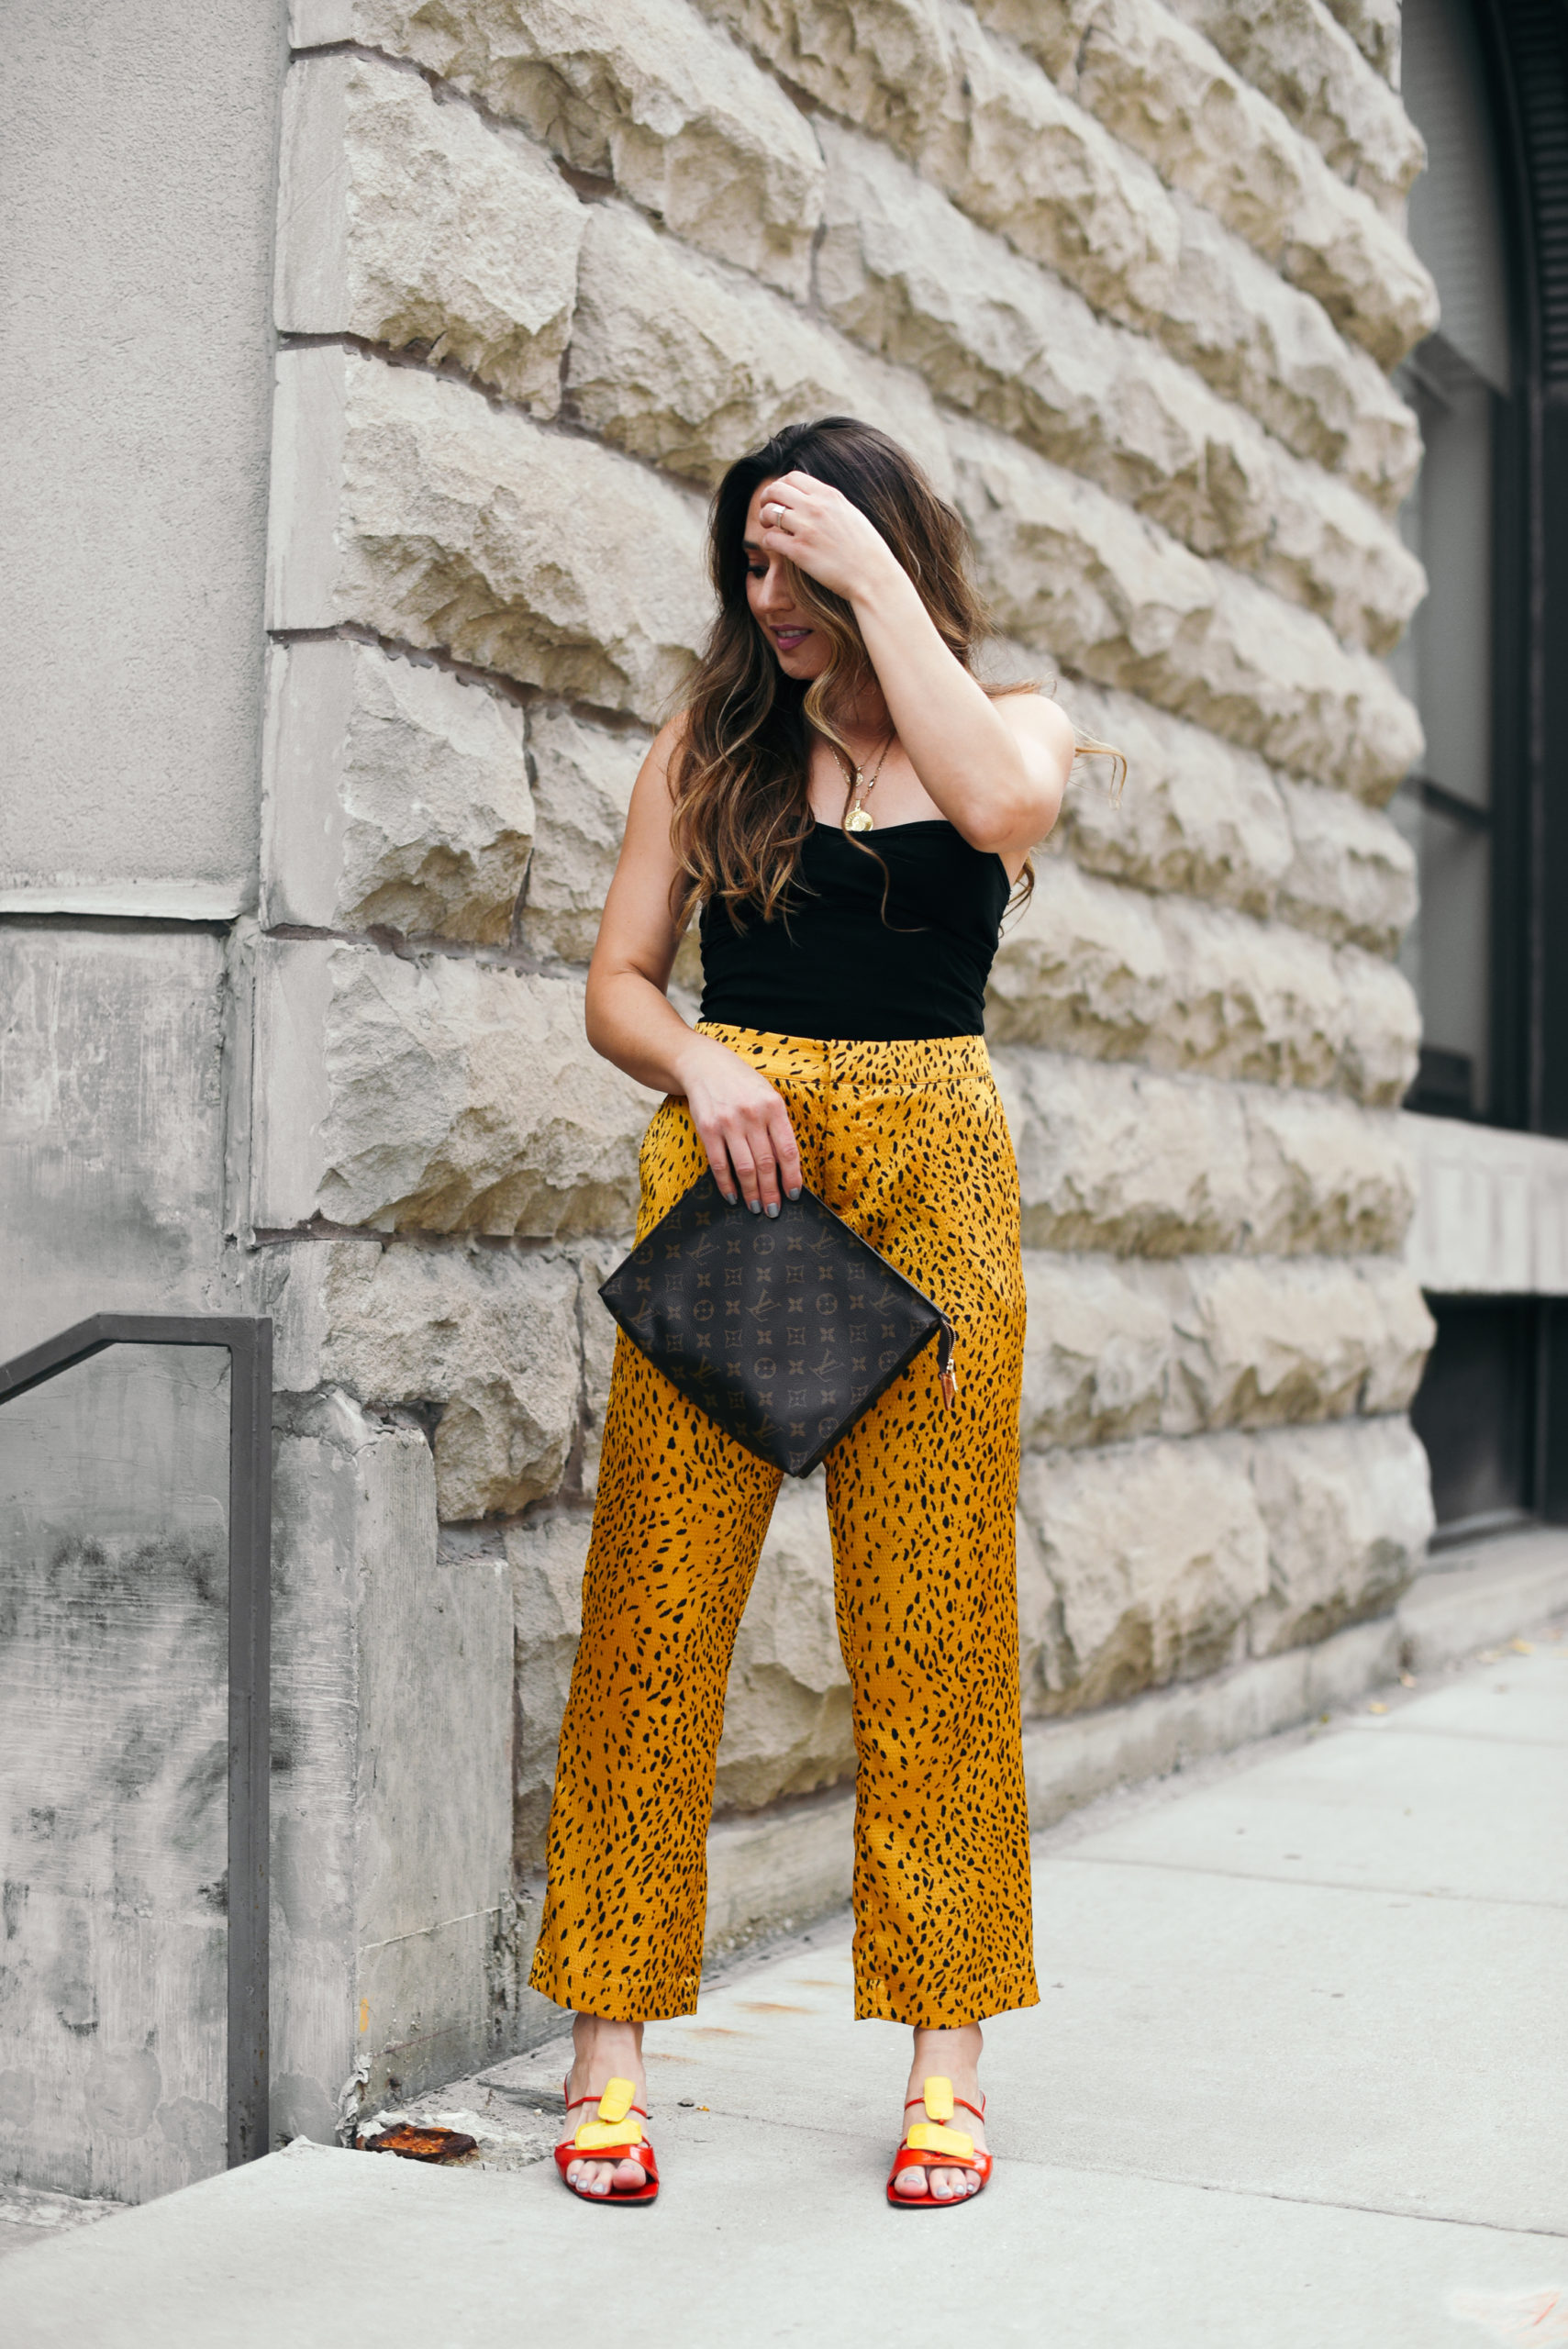 end-of-summer-outfit-silky-cheetah-pants-tube-top-streetstyle-fun-colors-girl-fashion